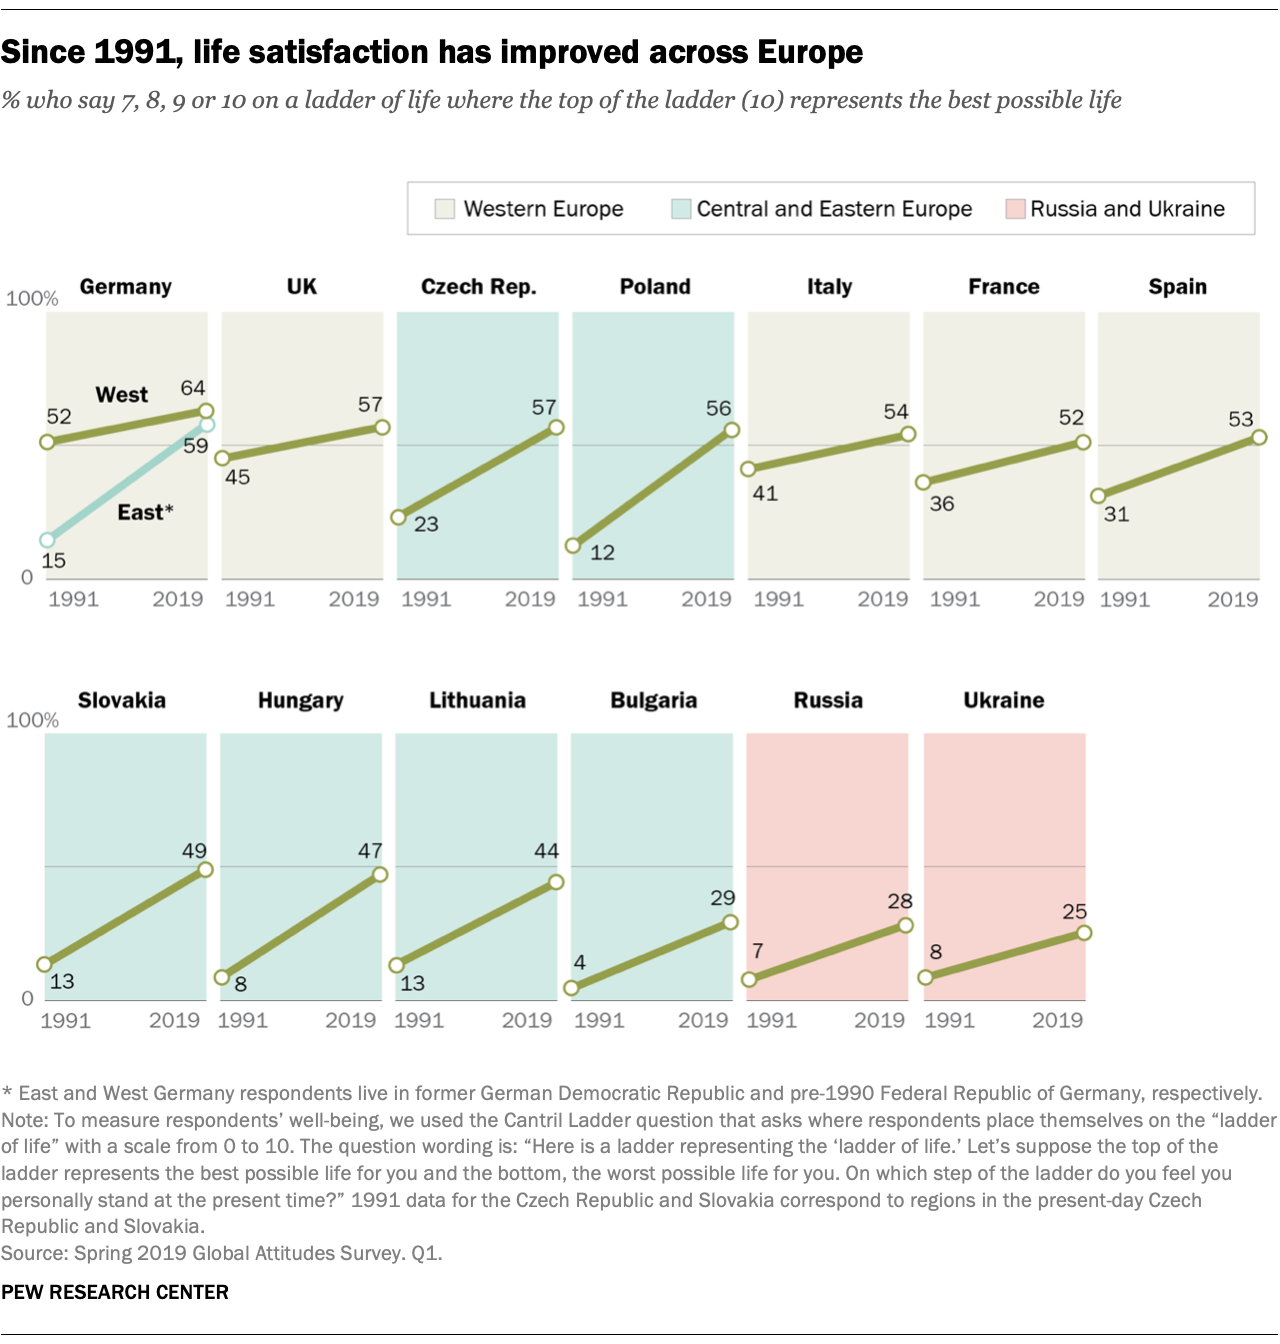 Since 1991, life satisfaction has improved across Europe